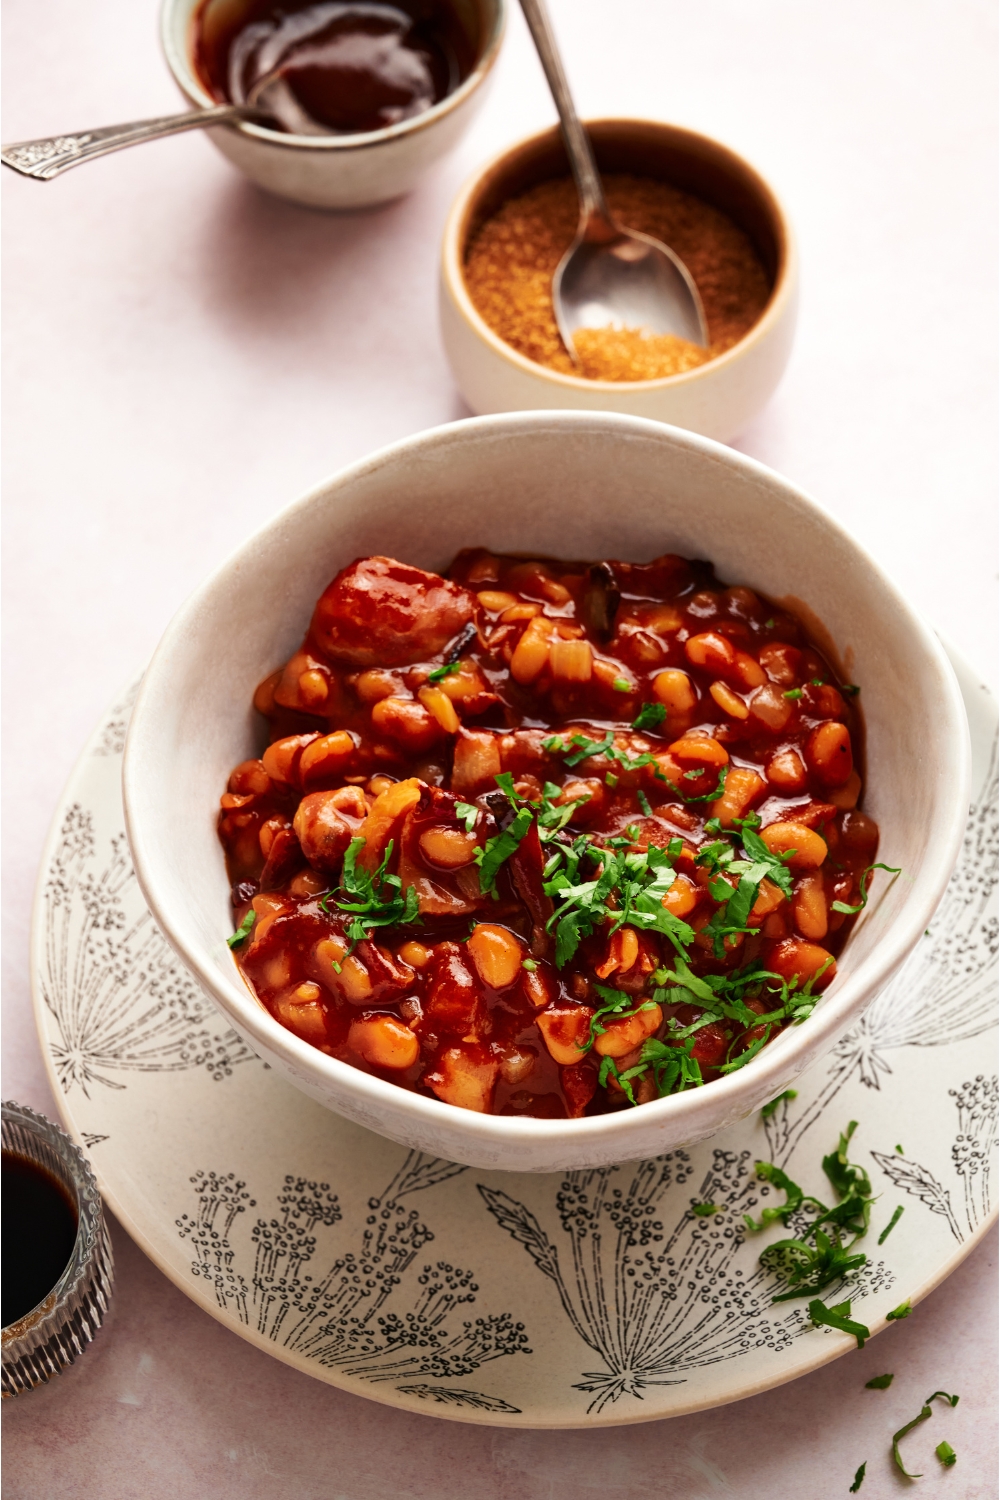 A bowl of baked beans in a brown sauce with fresh green herbs on top.